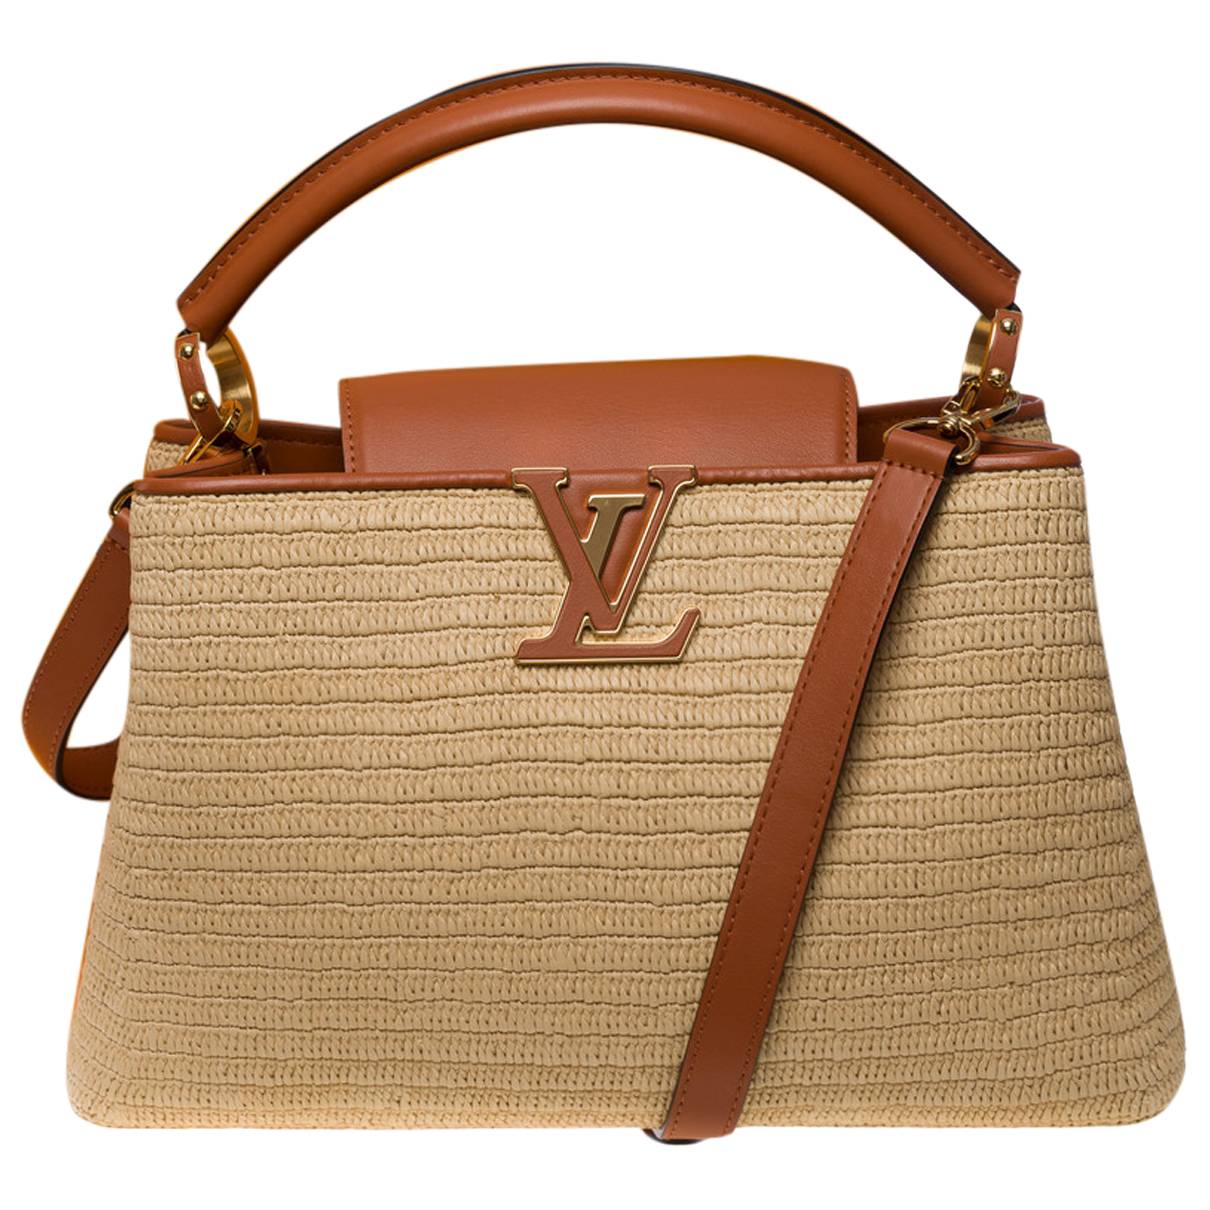 The Louis Vuitton Capucines is the Perfect Purse